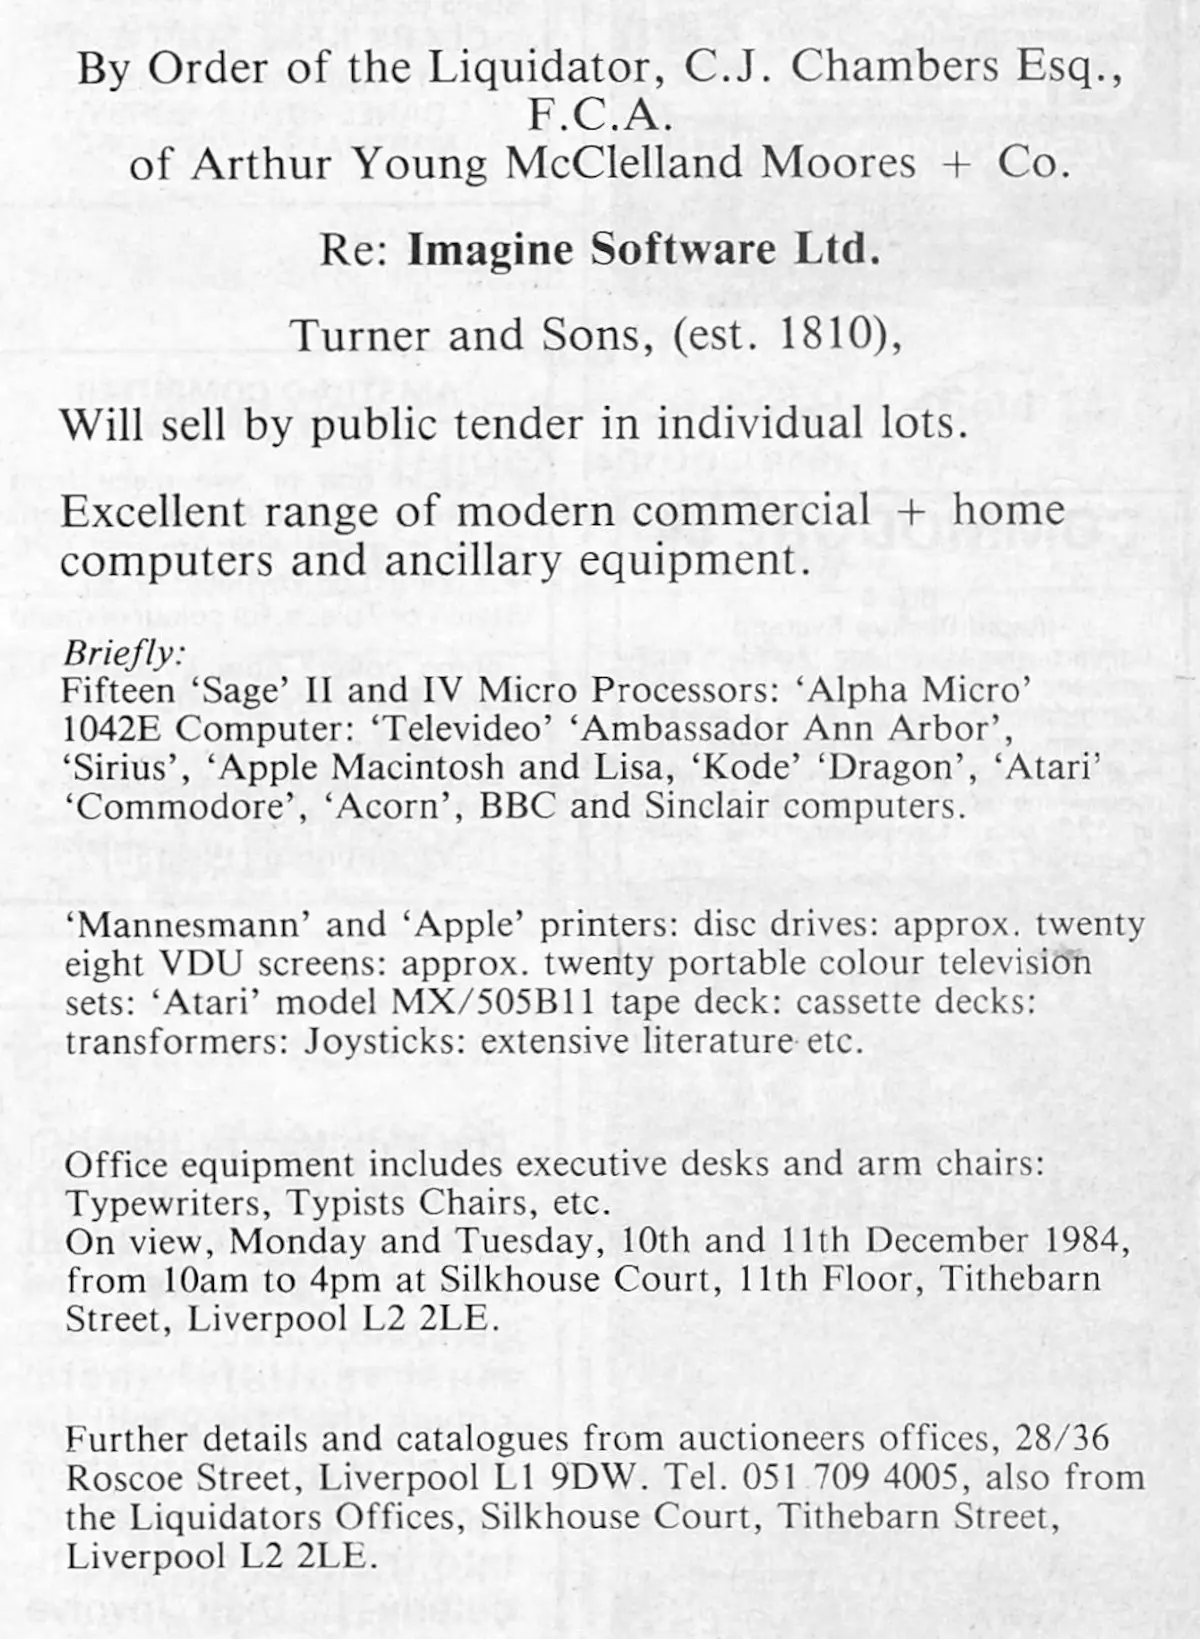 Notice of the auction of the remains of Imagine Software by its liquidator, C. J. Chambers of Arthur Young McClelland Moores and Company. From Your Computer, December 1984